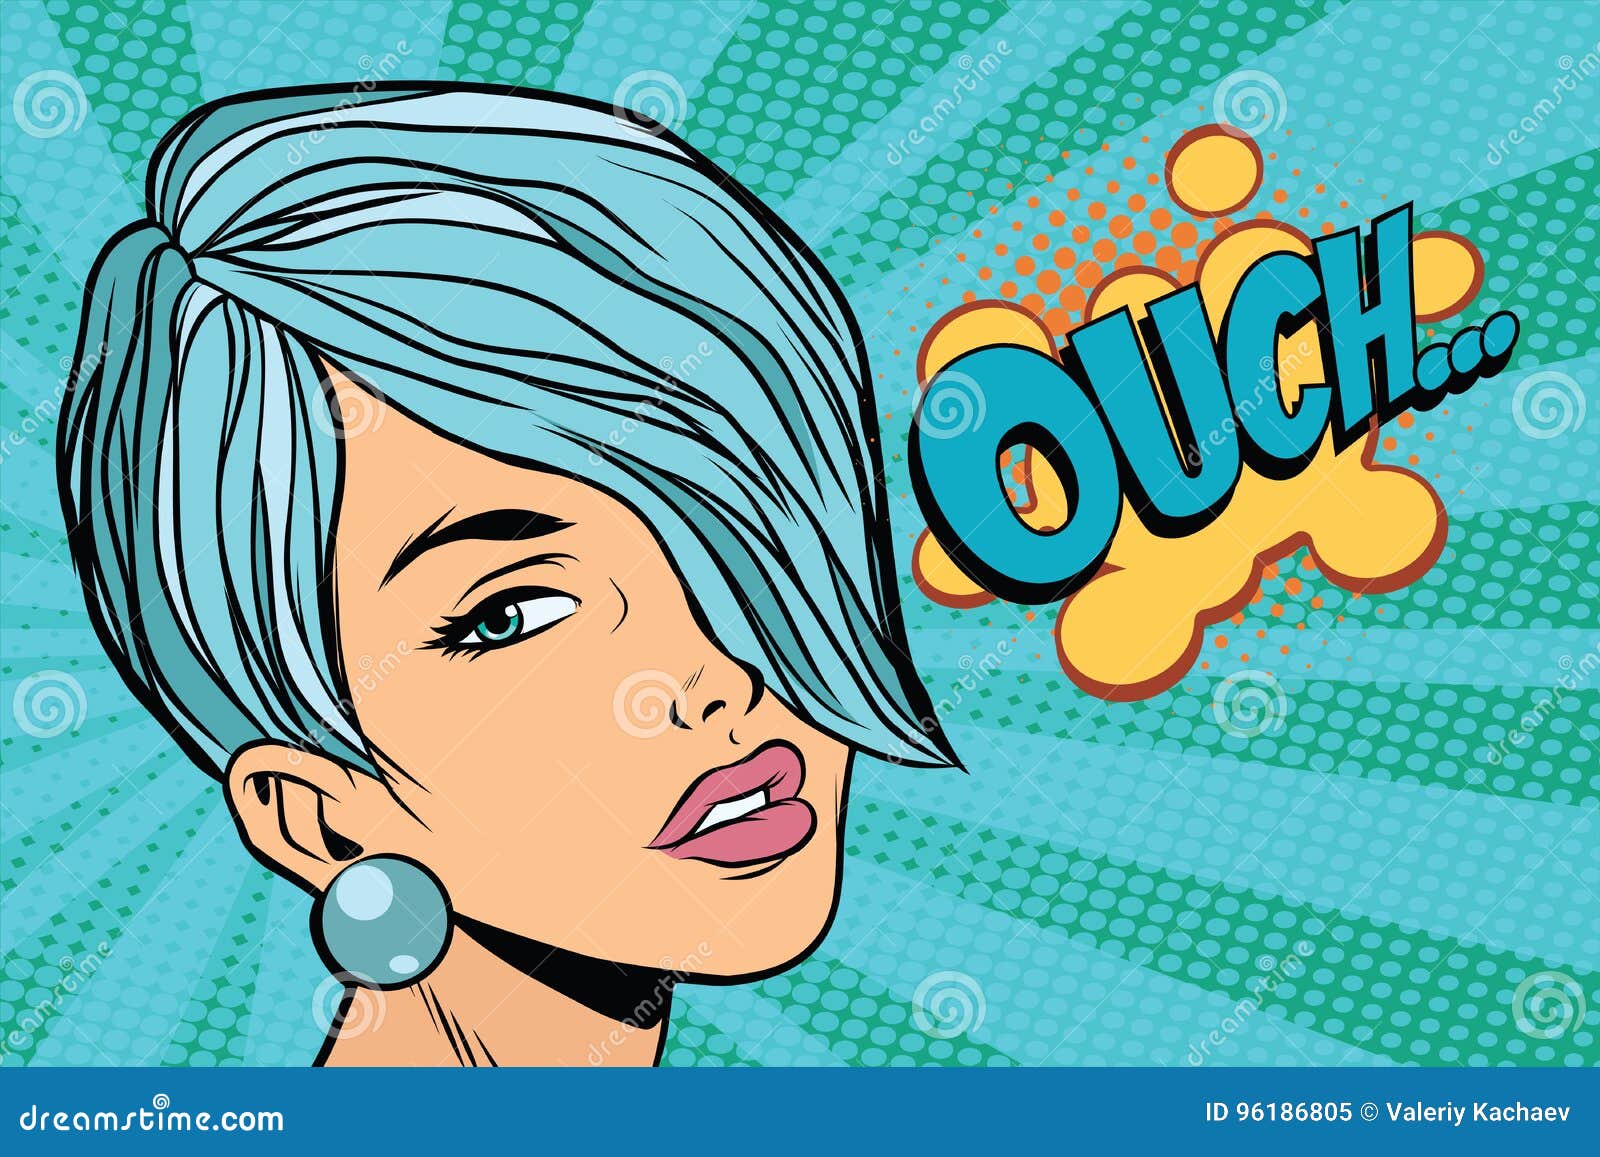  Ouch  Cartoons Illustrations Vector Stock Images 764 